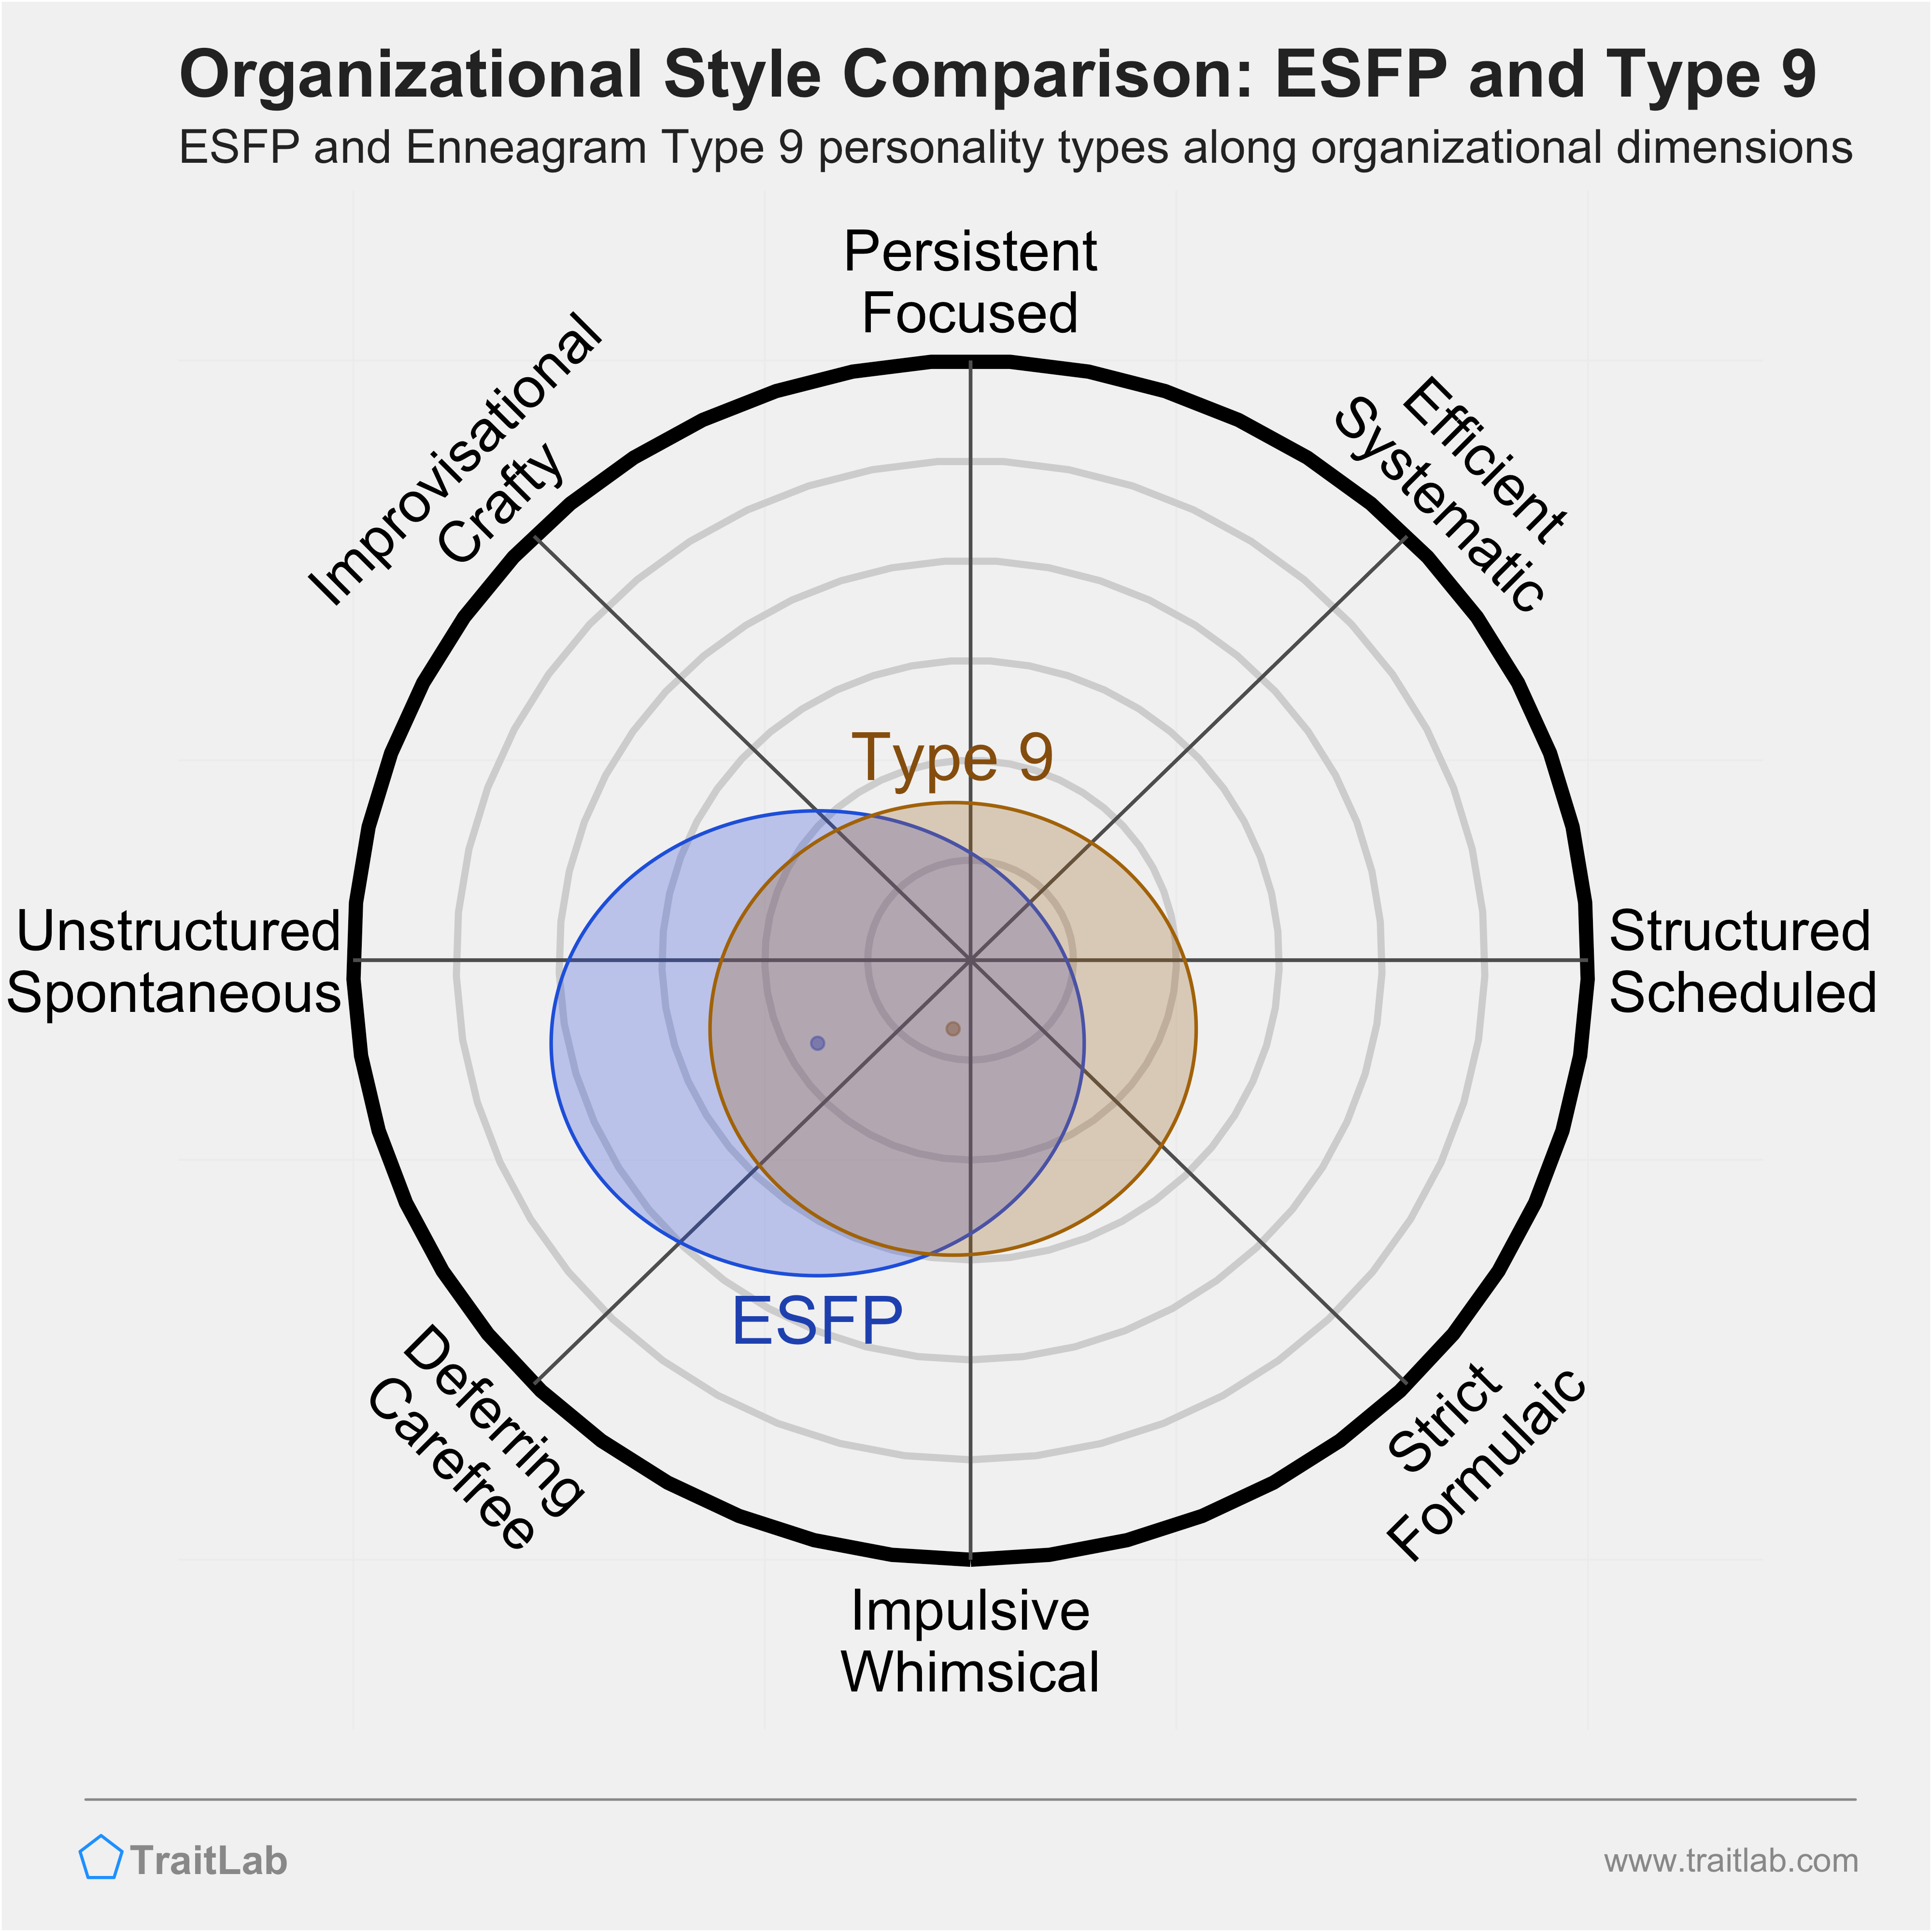 ESFP and Type 9 comparison across organizational dimensions